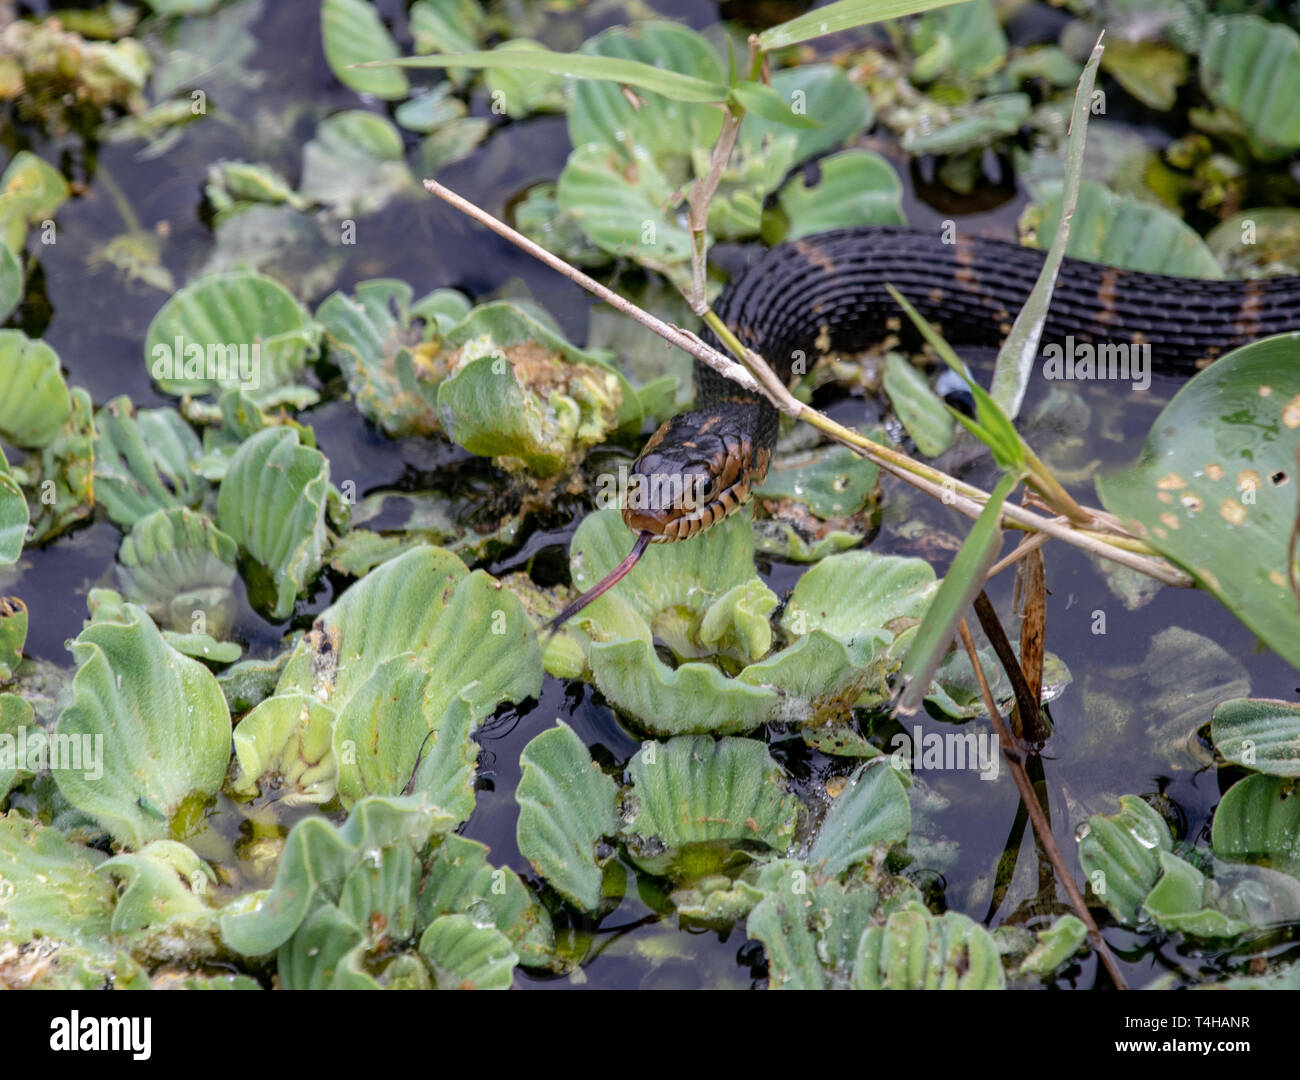 Banded water snake sticking tongue out Stock Photo